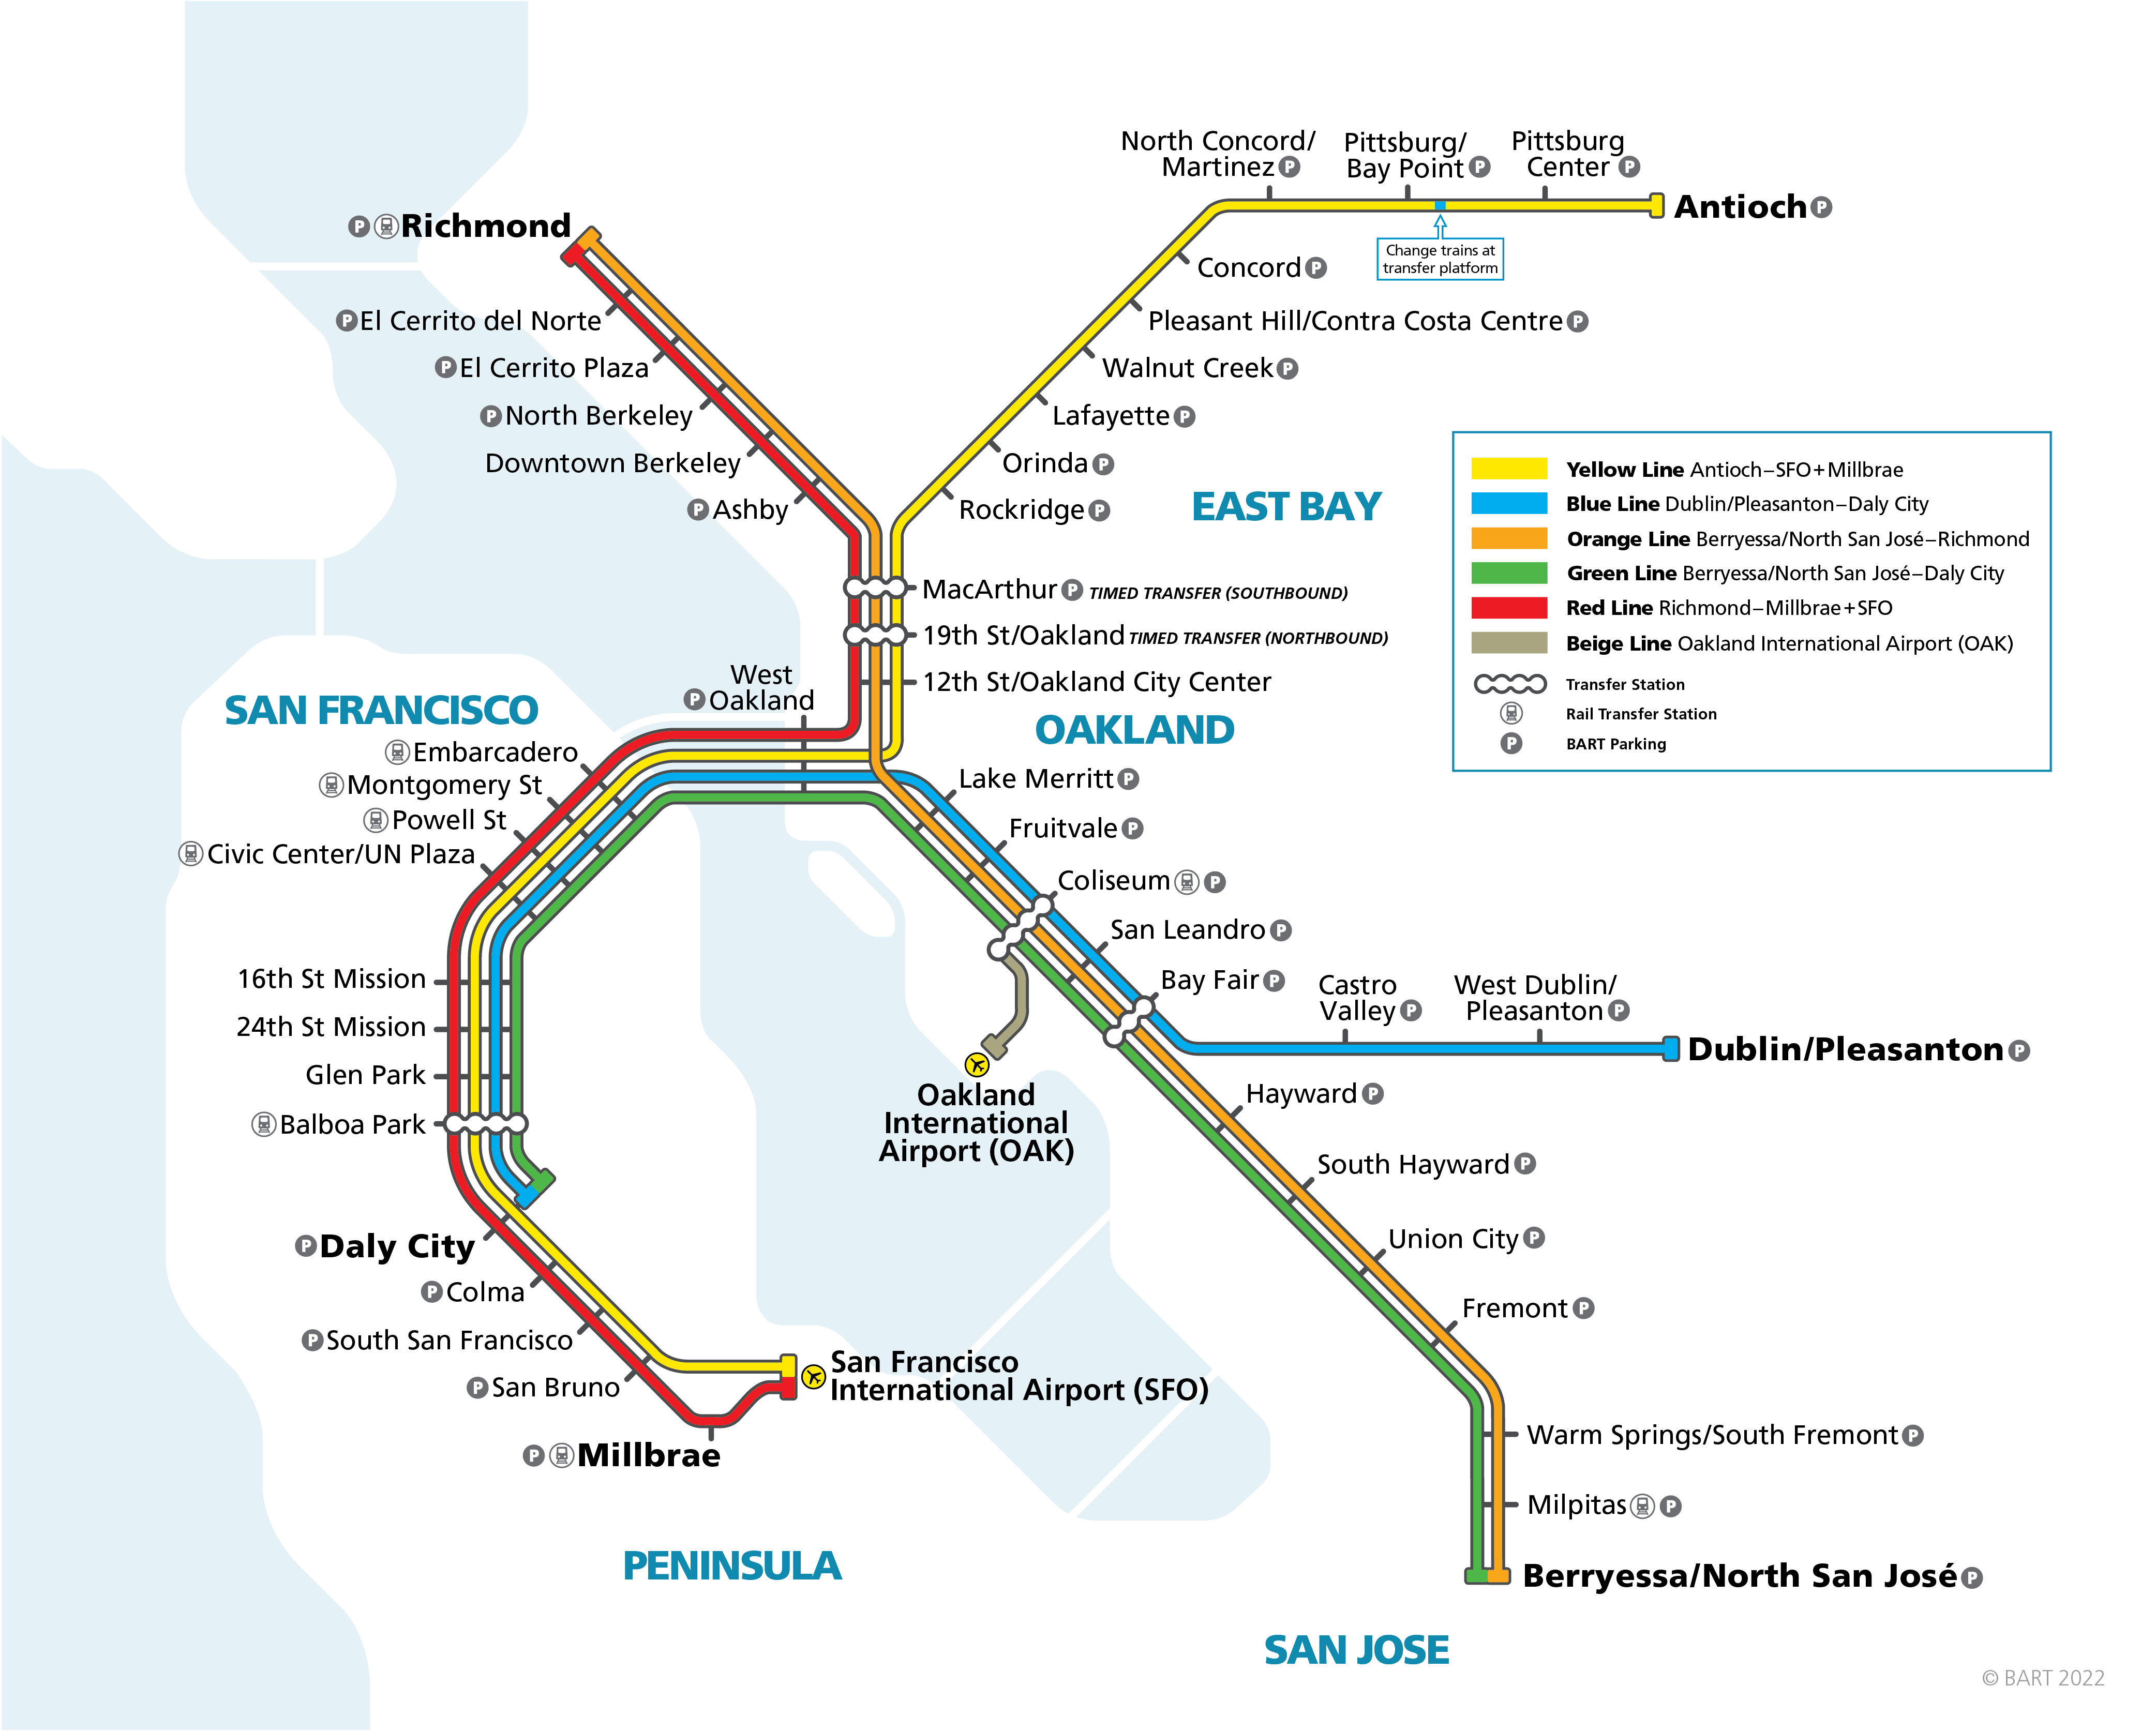 BART map to Pittsburg Bay Point